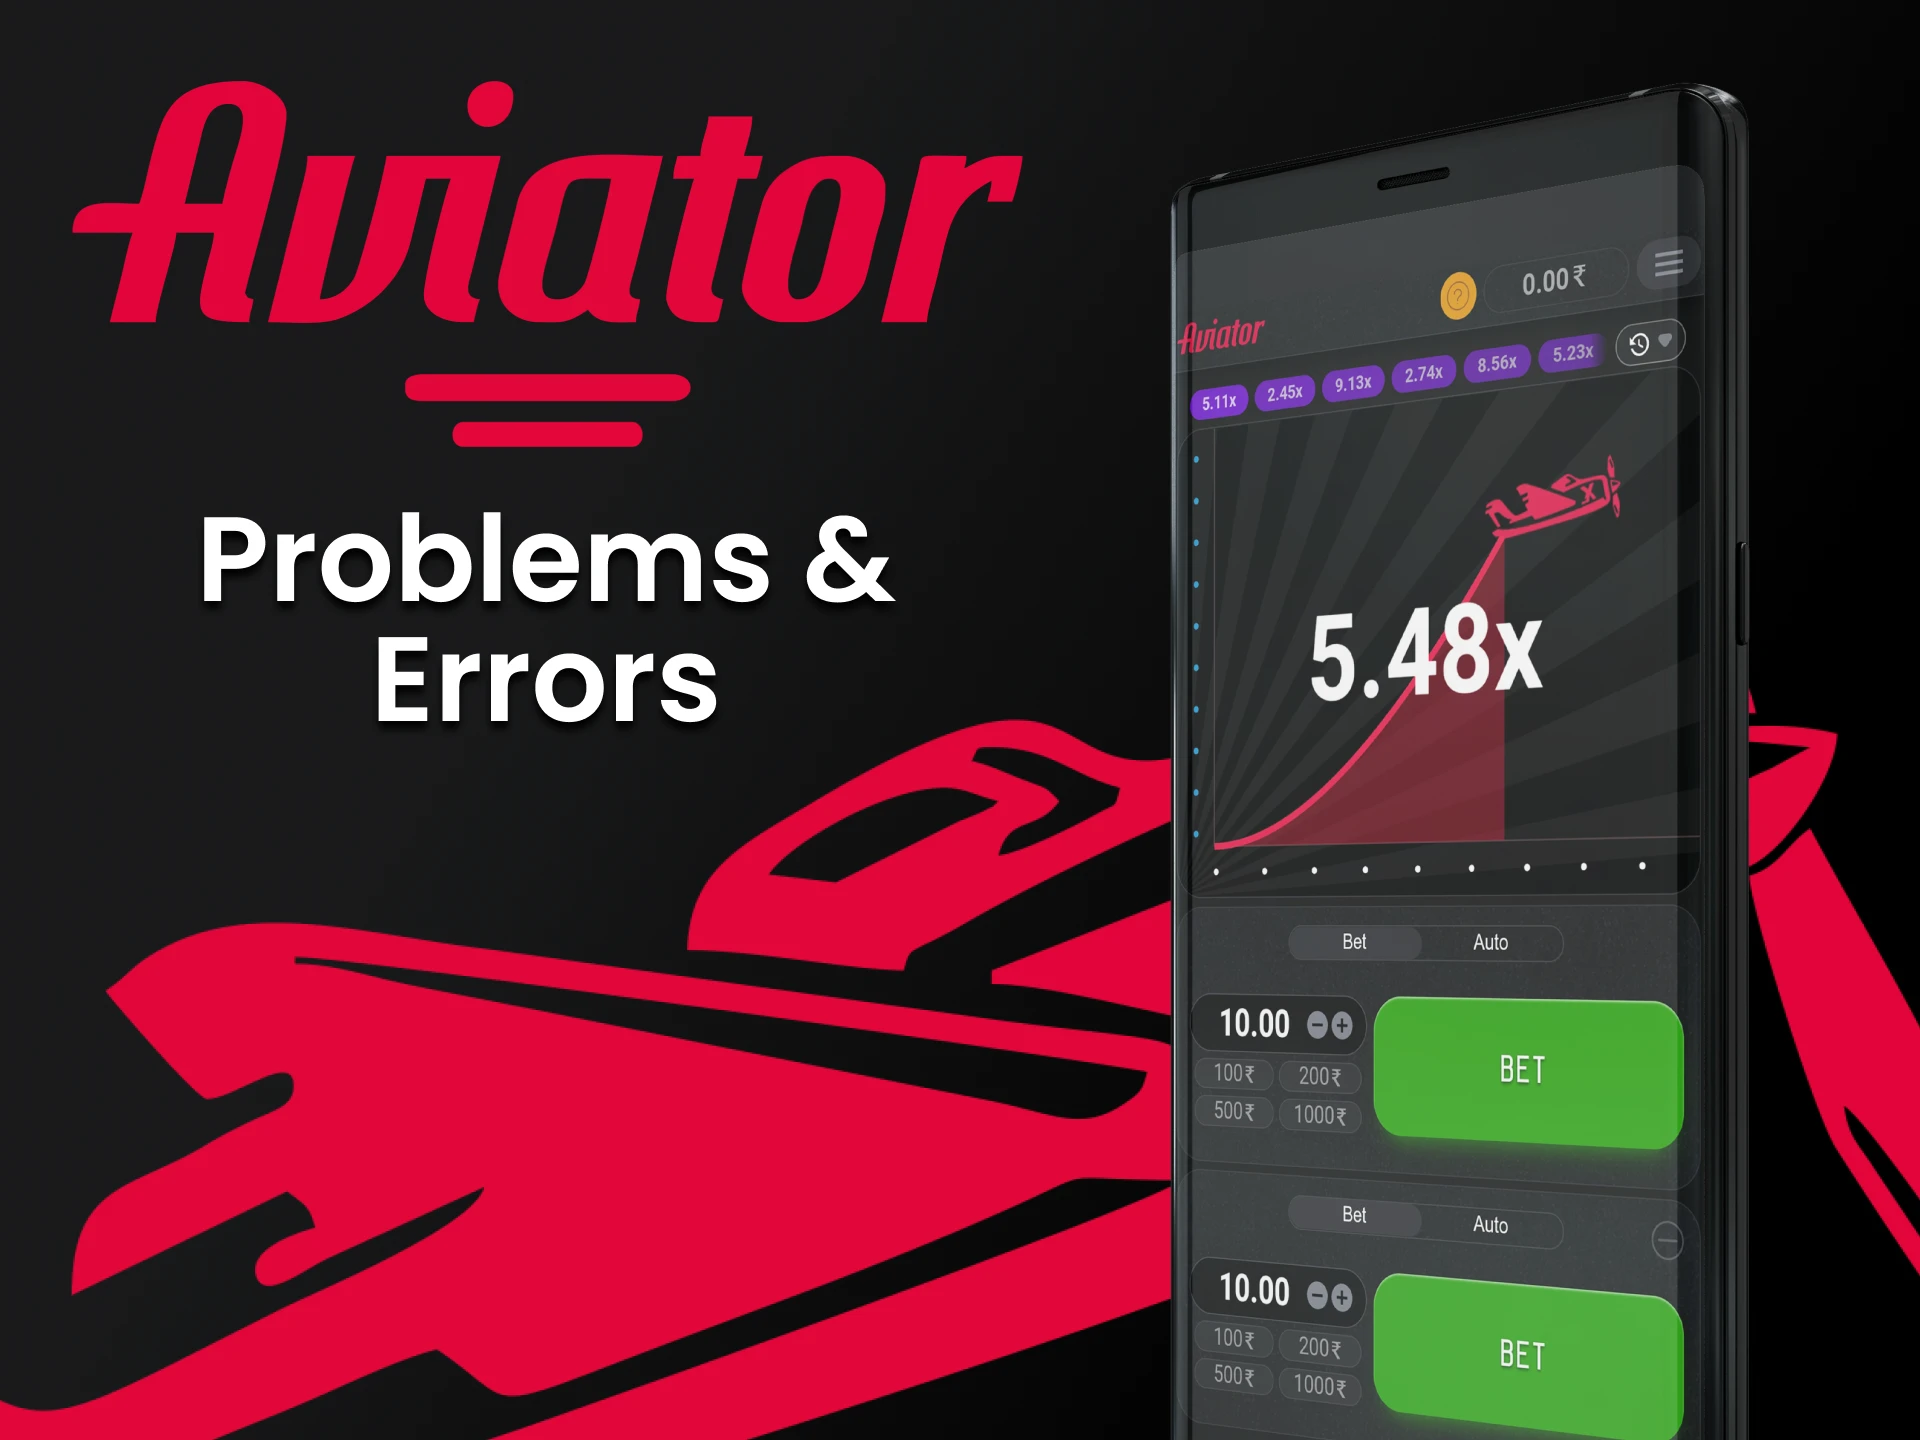 If problems arise, the Aviator app team eliminates them as quickly as possible.